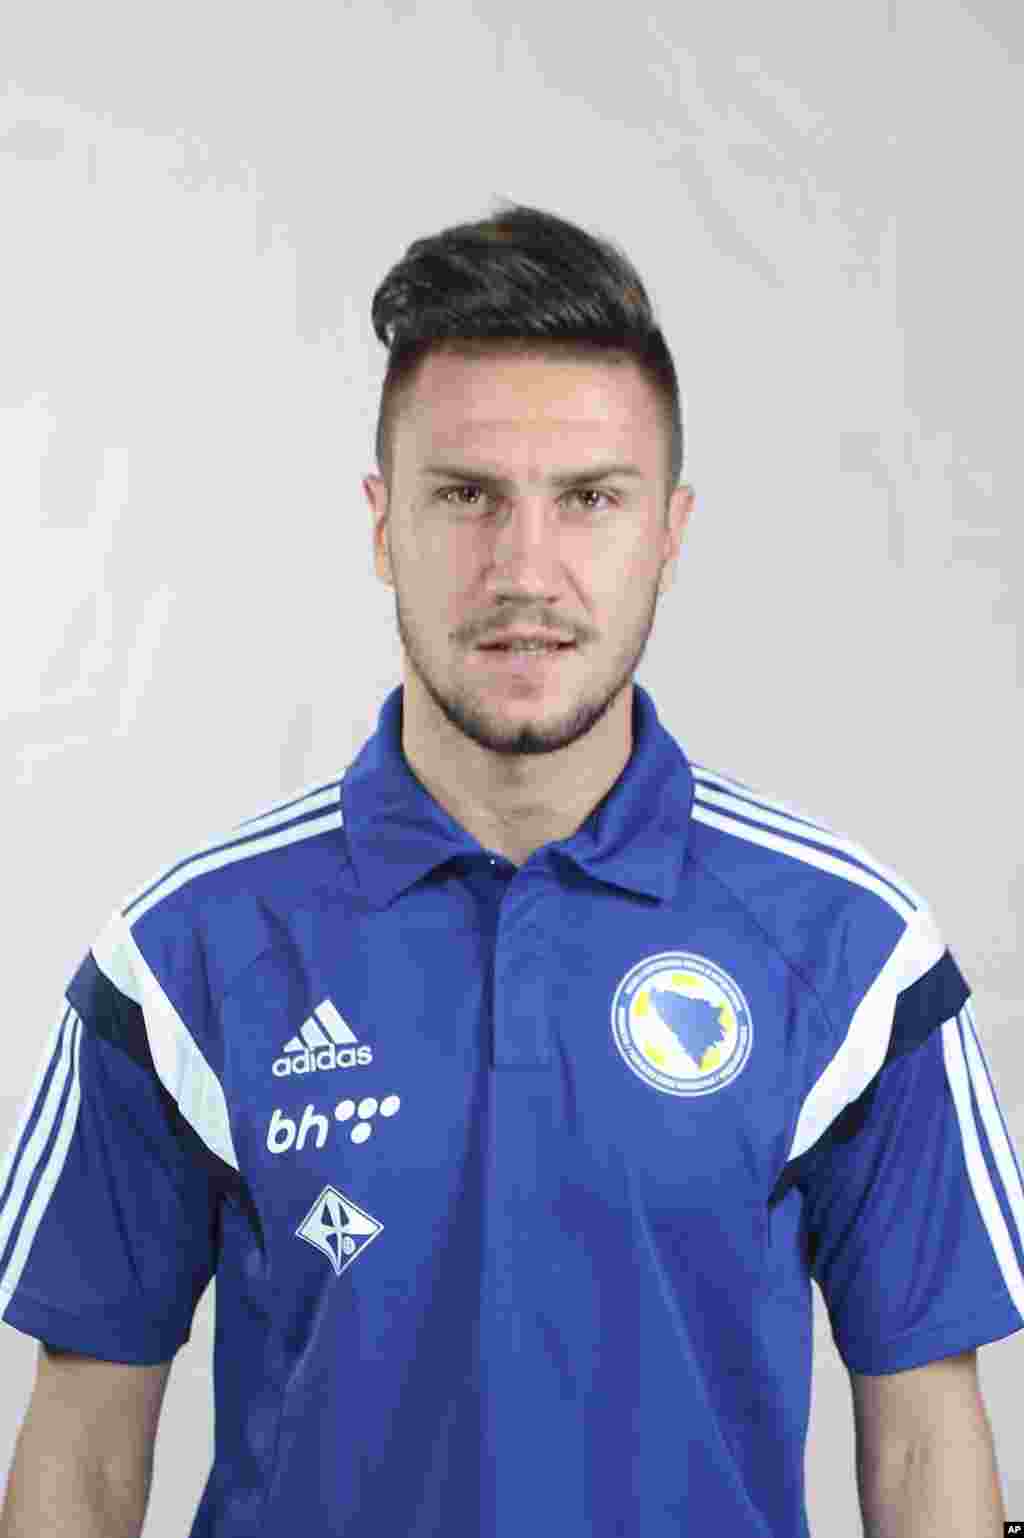 Bosnian national soccer player Ermin Bicakcic poses for a picture during a photo session in Sarajevo May 24, 2014. The Bosnian squad will face Argentina, Iran and Nigeria in Group F of the 2014 World Cup finals in Brazil. Picture taken May 24, 2014. REUTERS